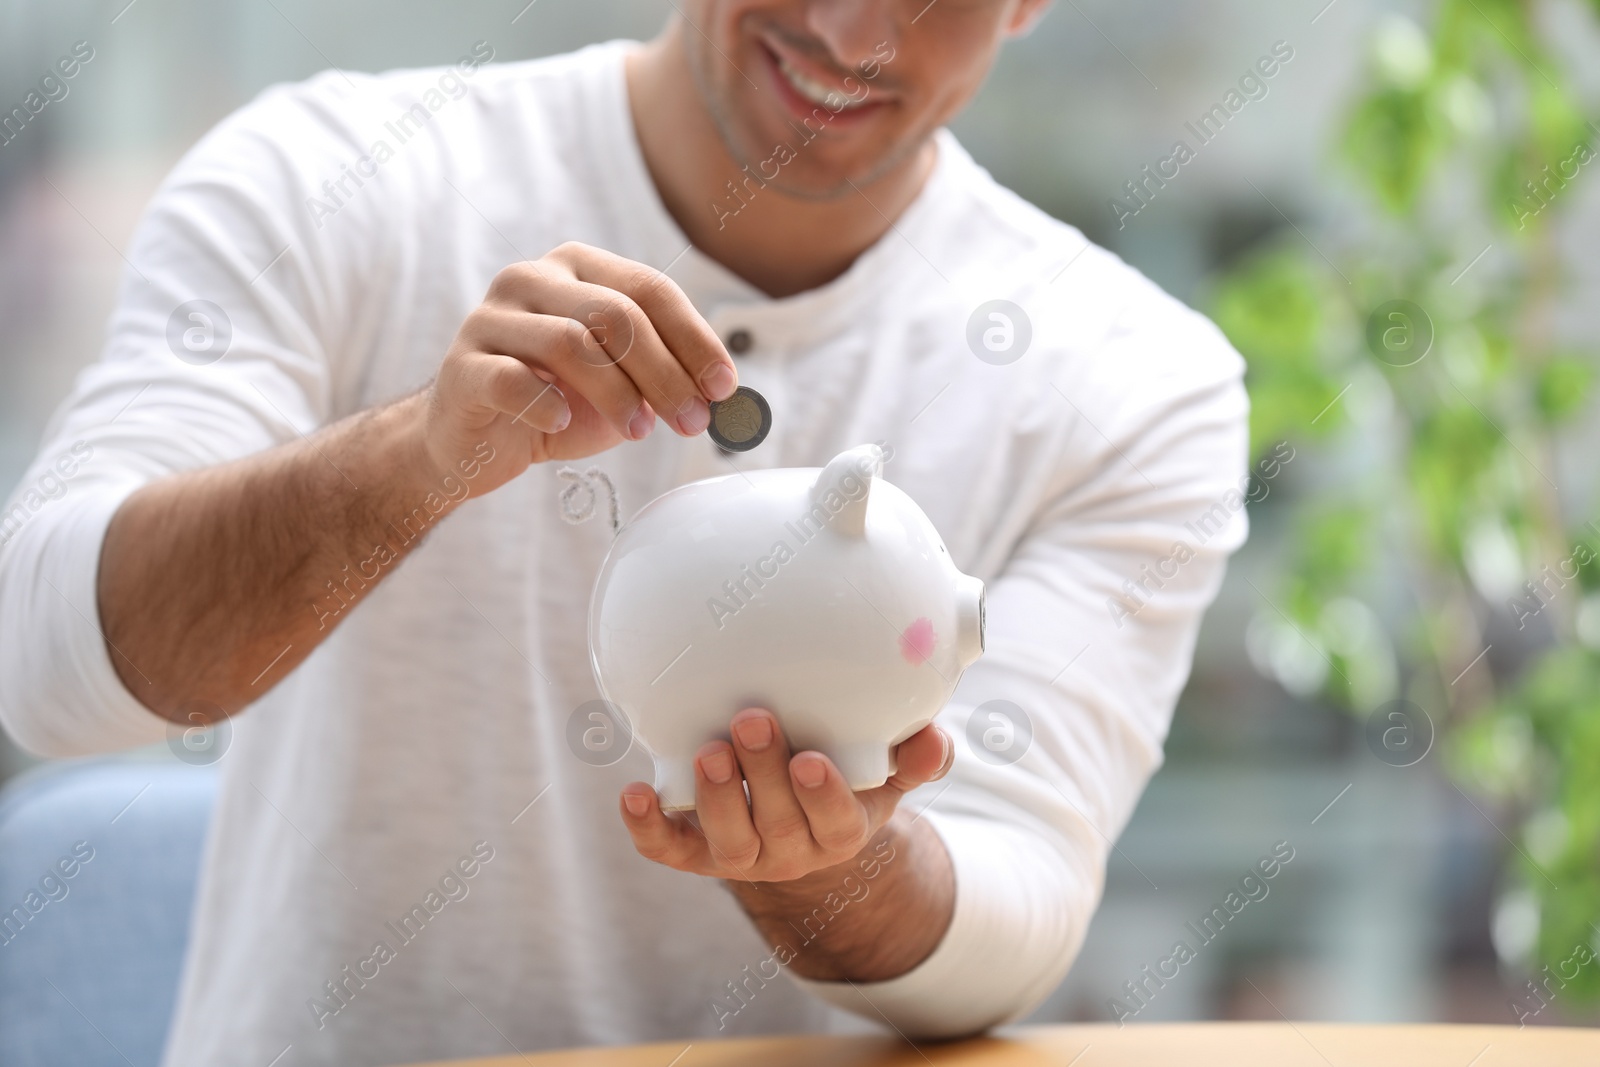 Photo of Man putting money into piggy bank against blurred background, closeup